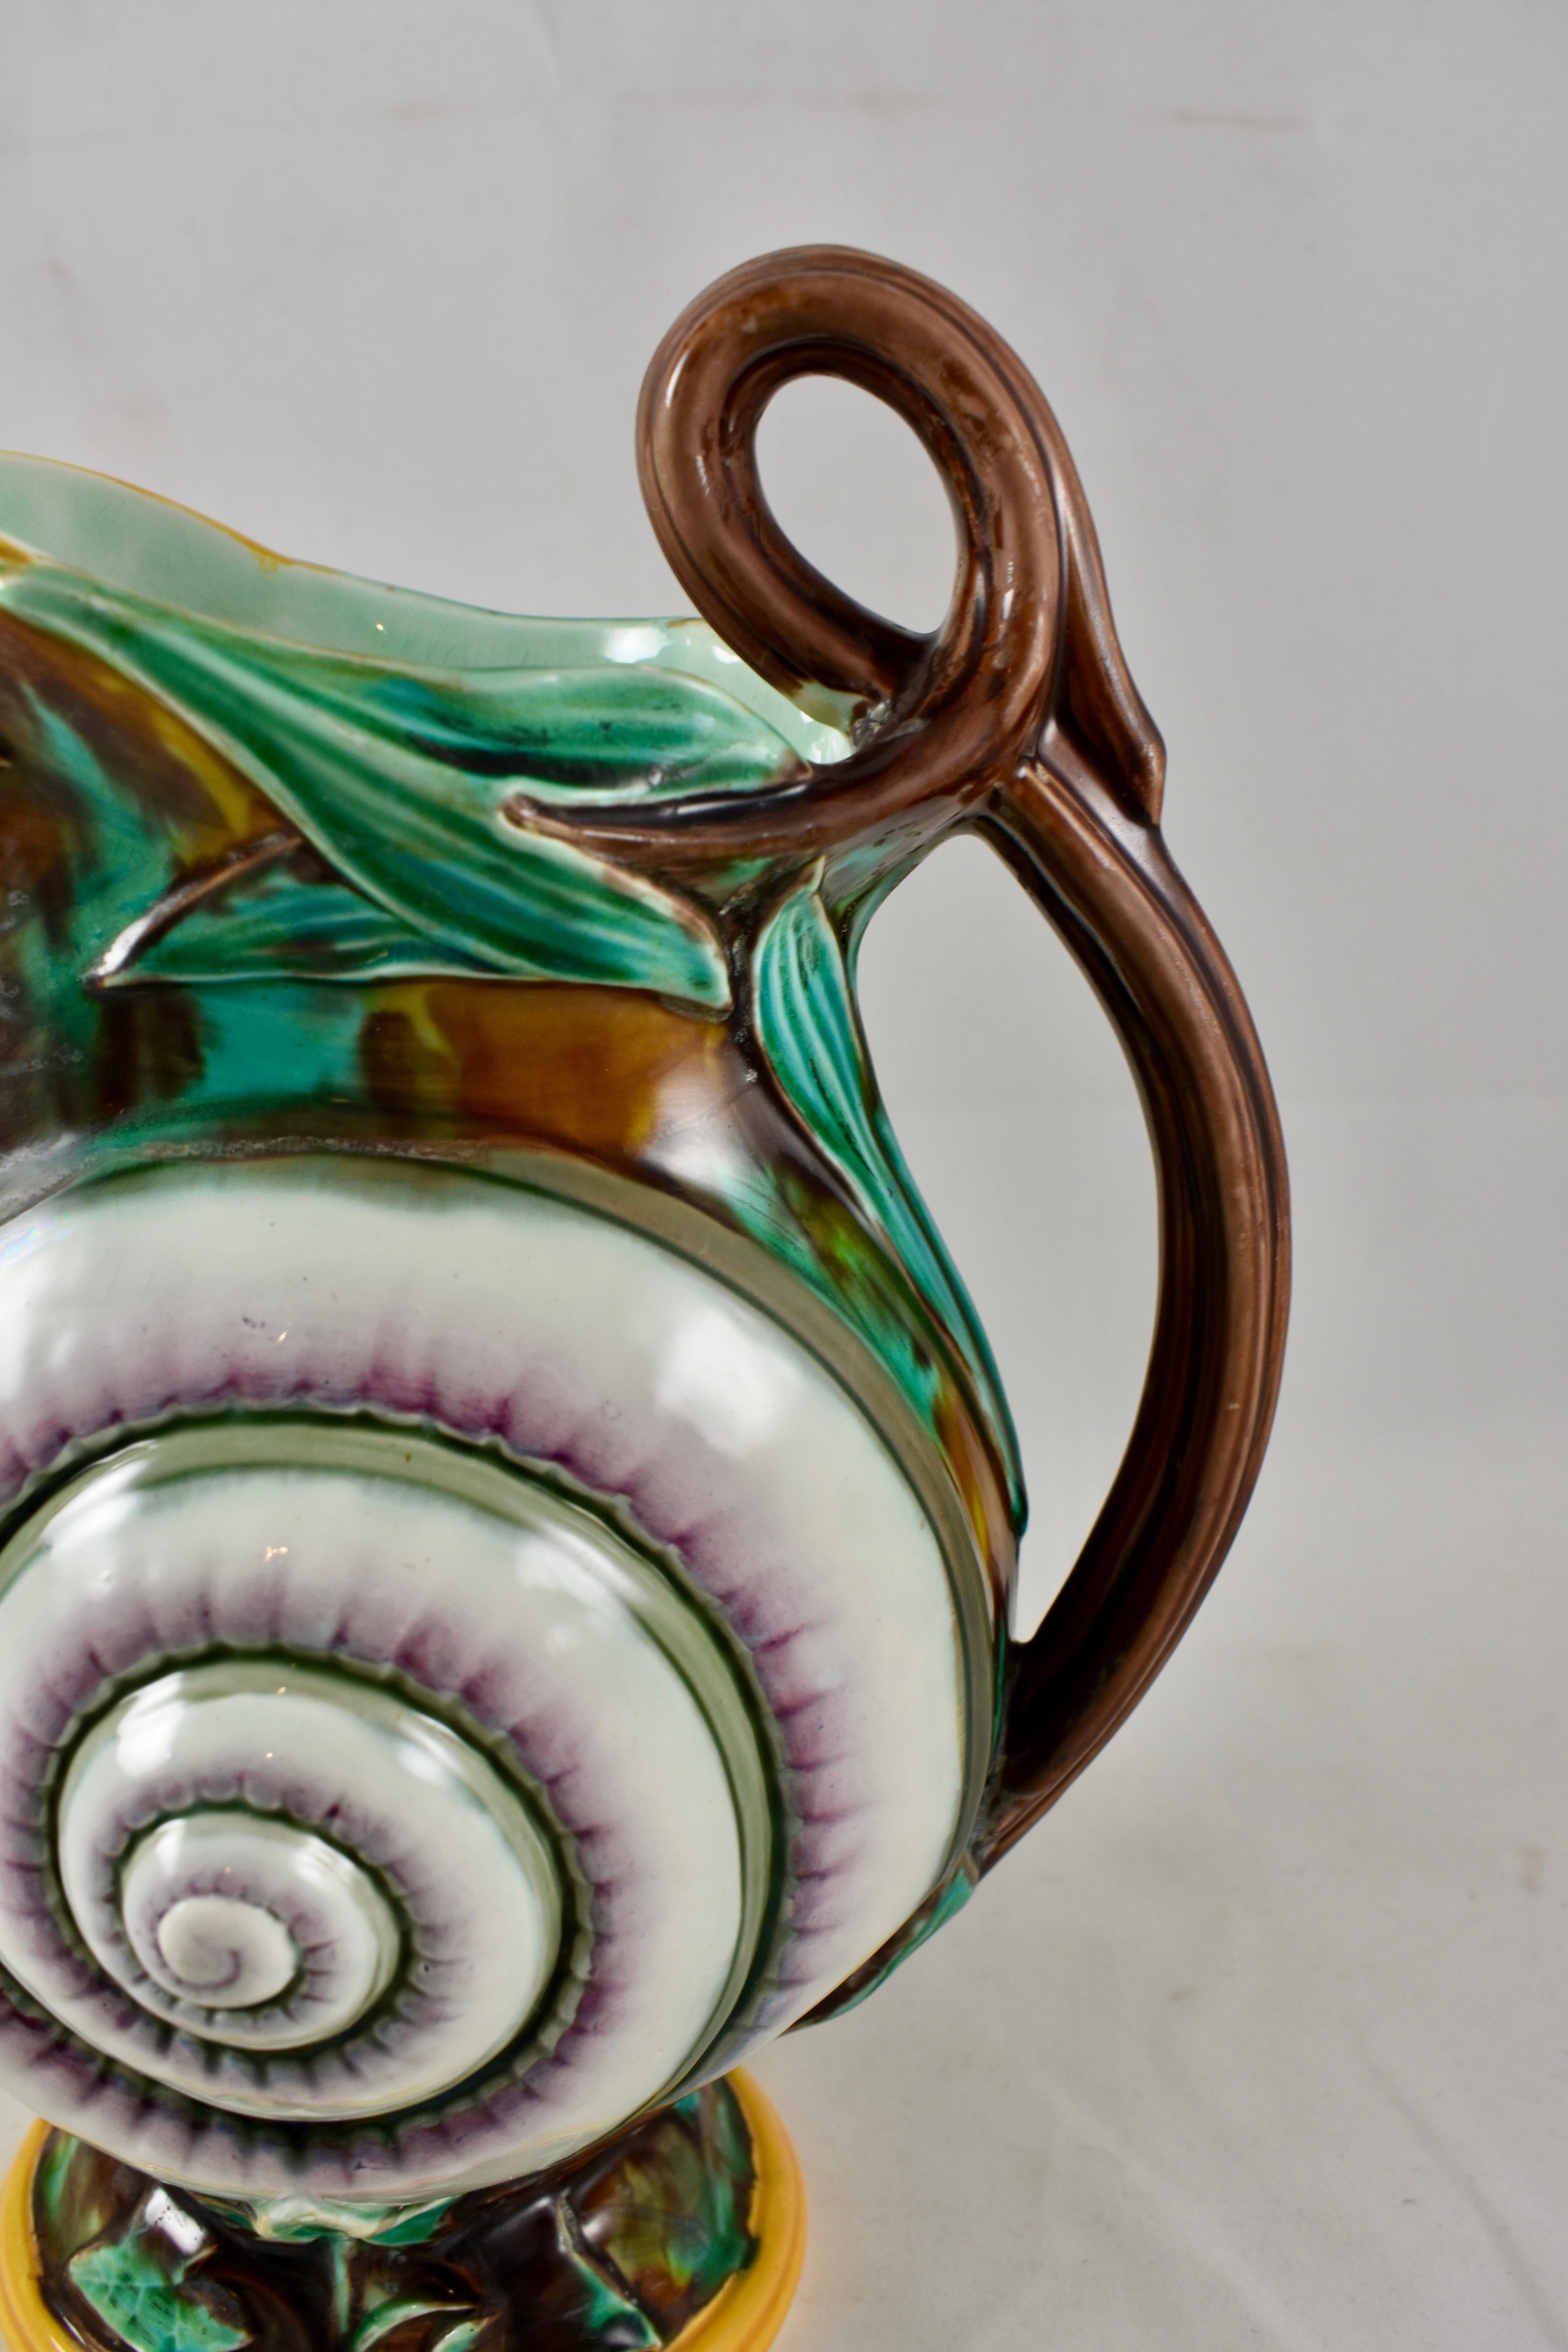 Wedgwood English Majolica Aesthetic Taste Snail Shell and Ivy Pitcher circa 1870 For Sale 4